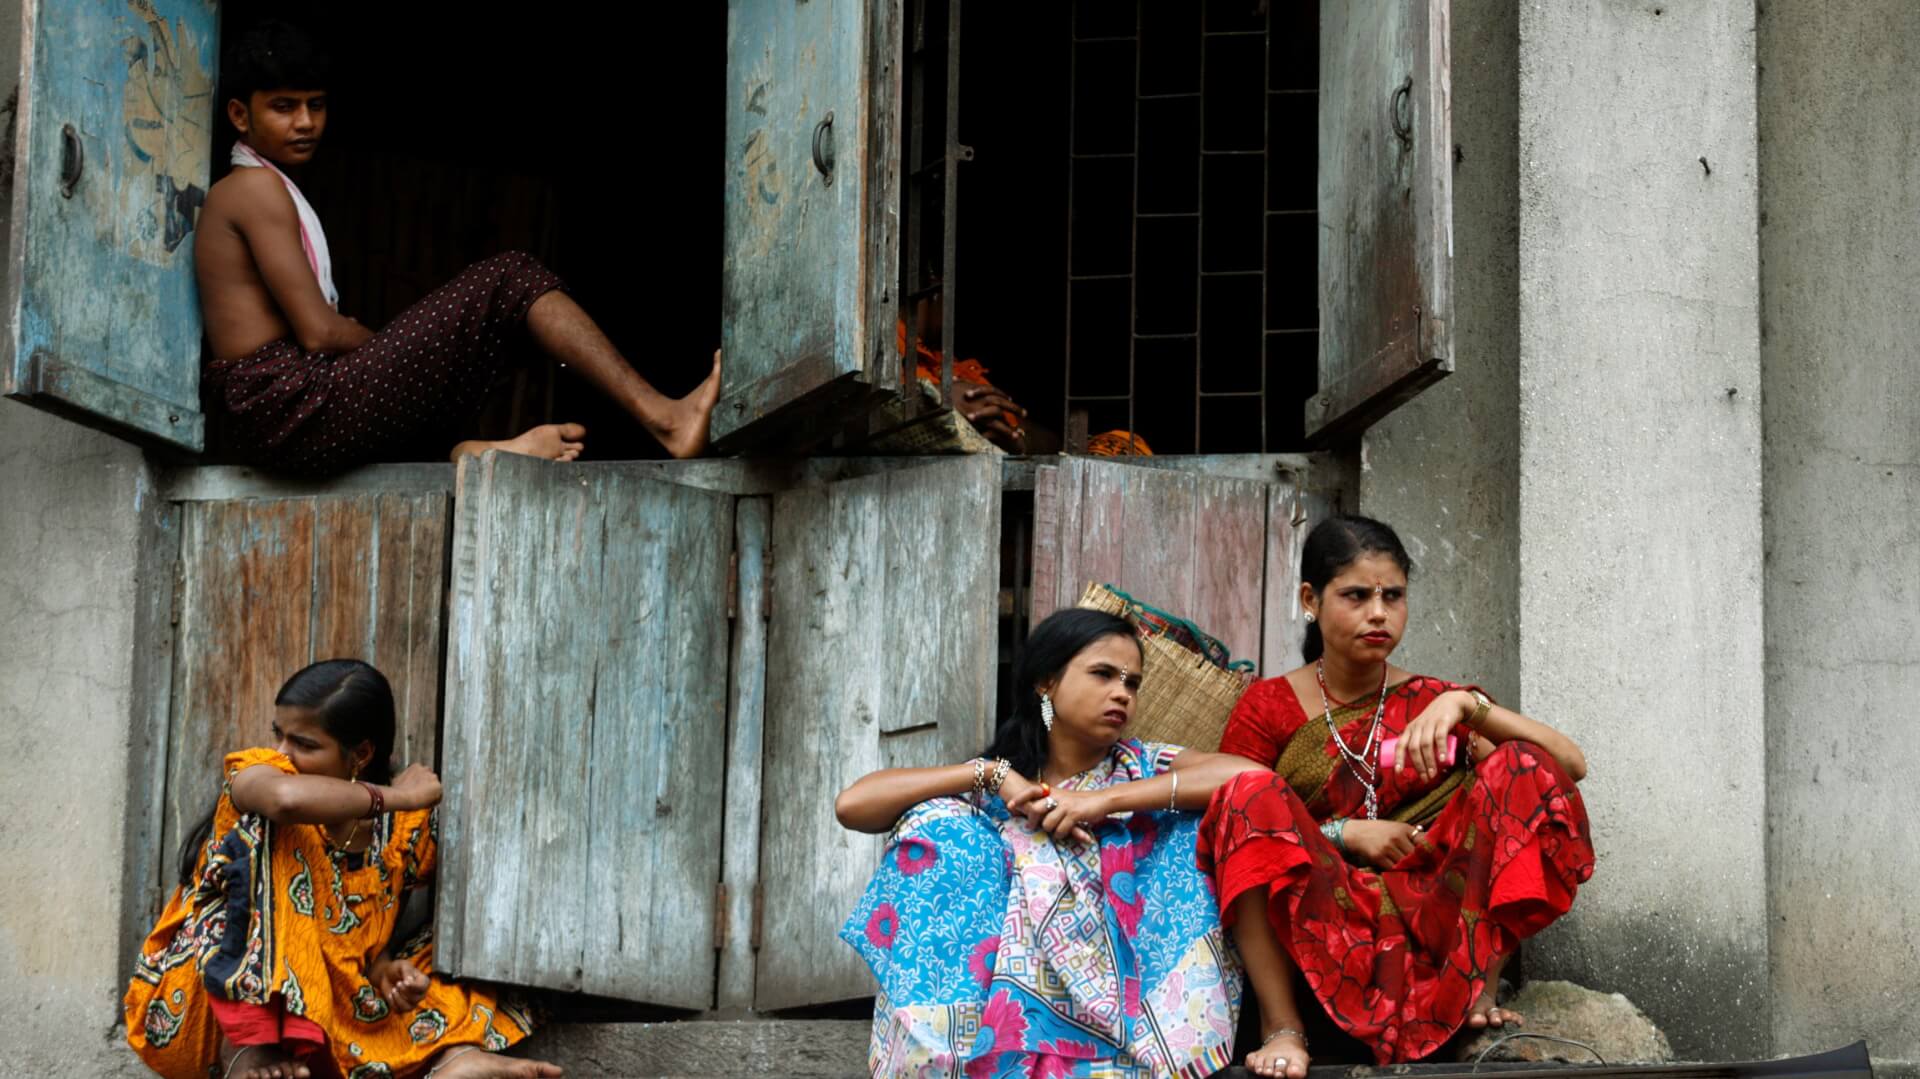 Sex Work Needs to Be Decriminalised in India, and the COVID-19 Crisis Shows Exactly Why